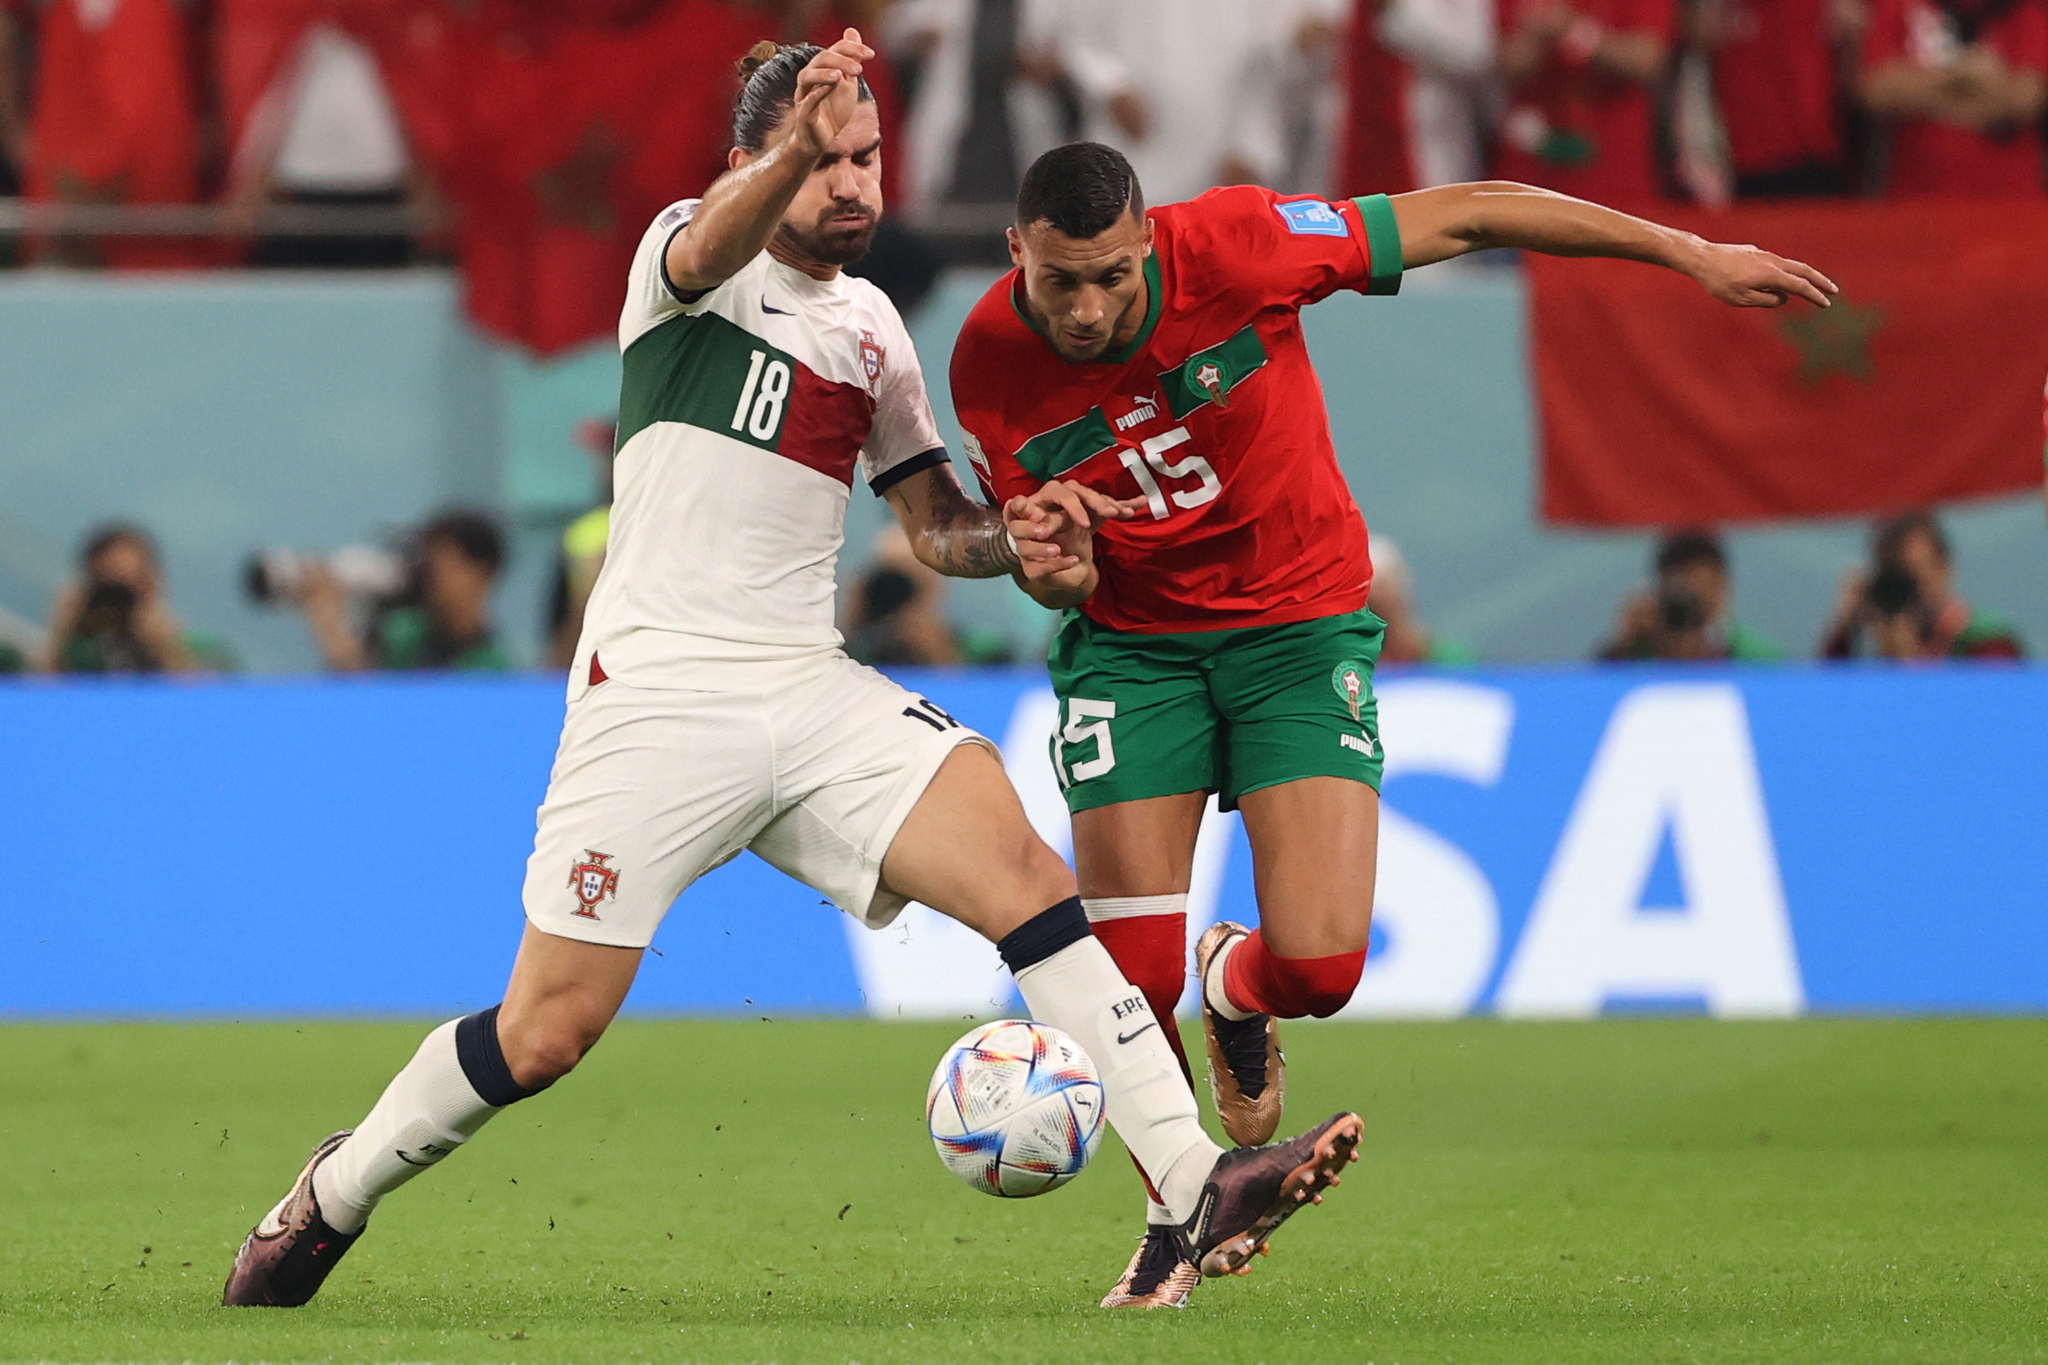 Morocco 1-0 Portugal History made at the 2022 World Cup